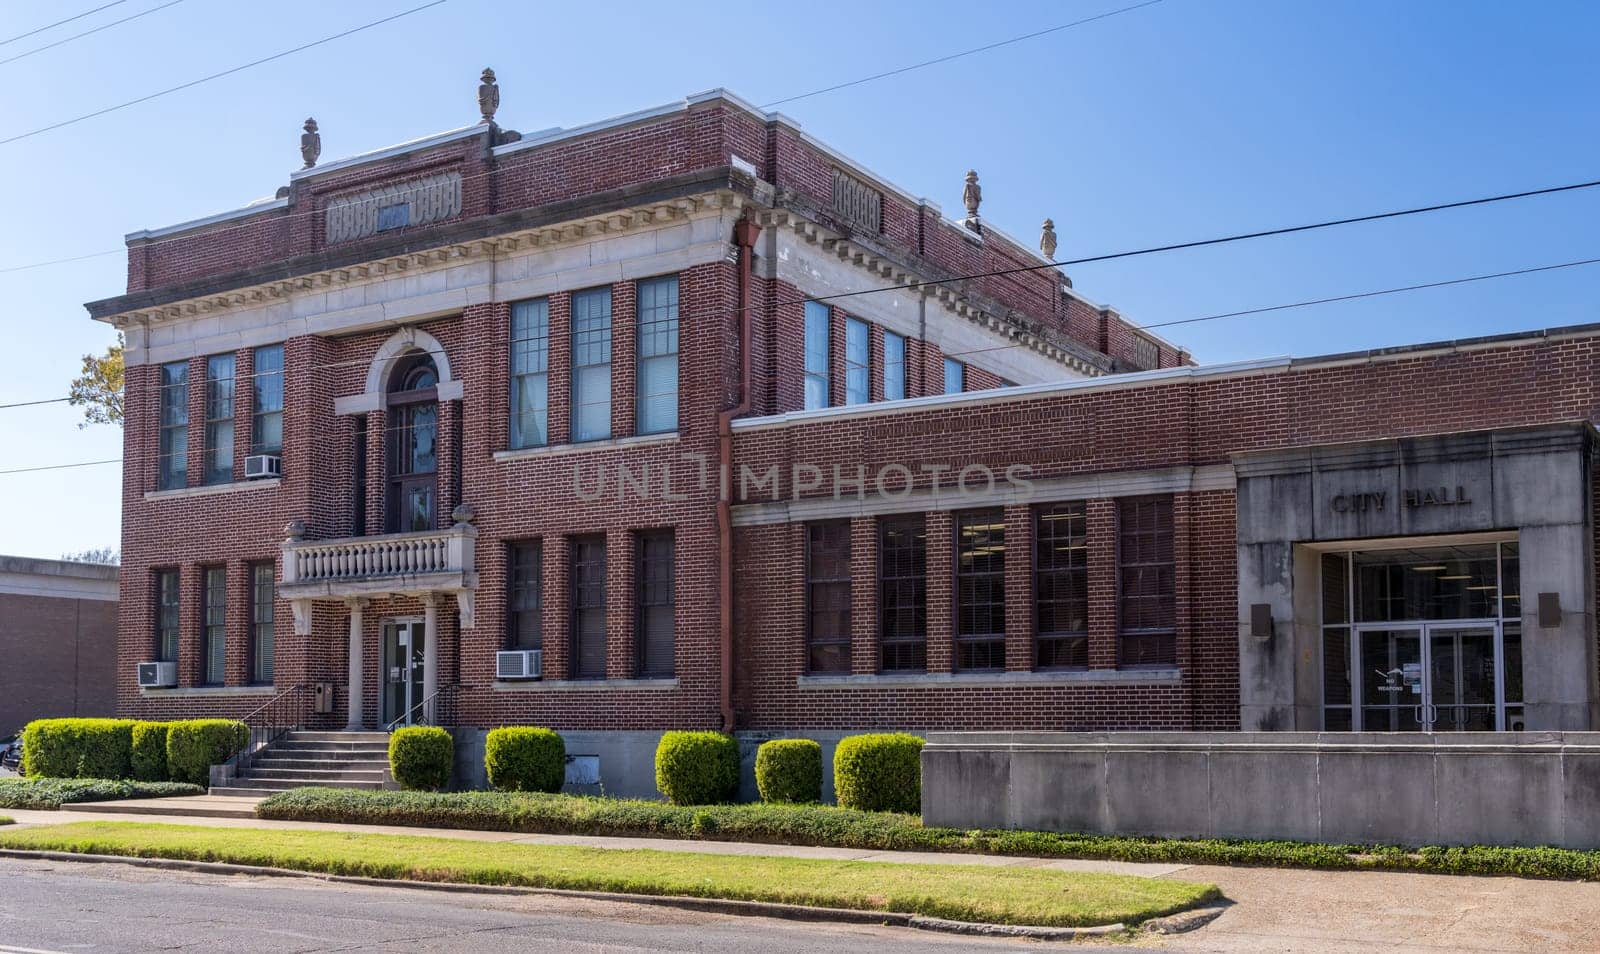 Side view of the City Hall in the small town of Greenville, MS by steheap